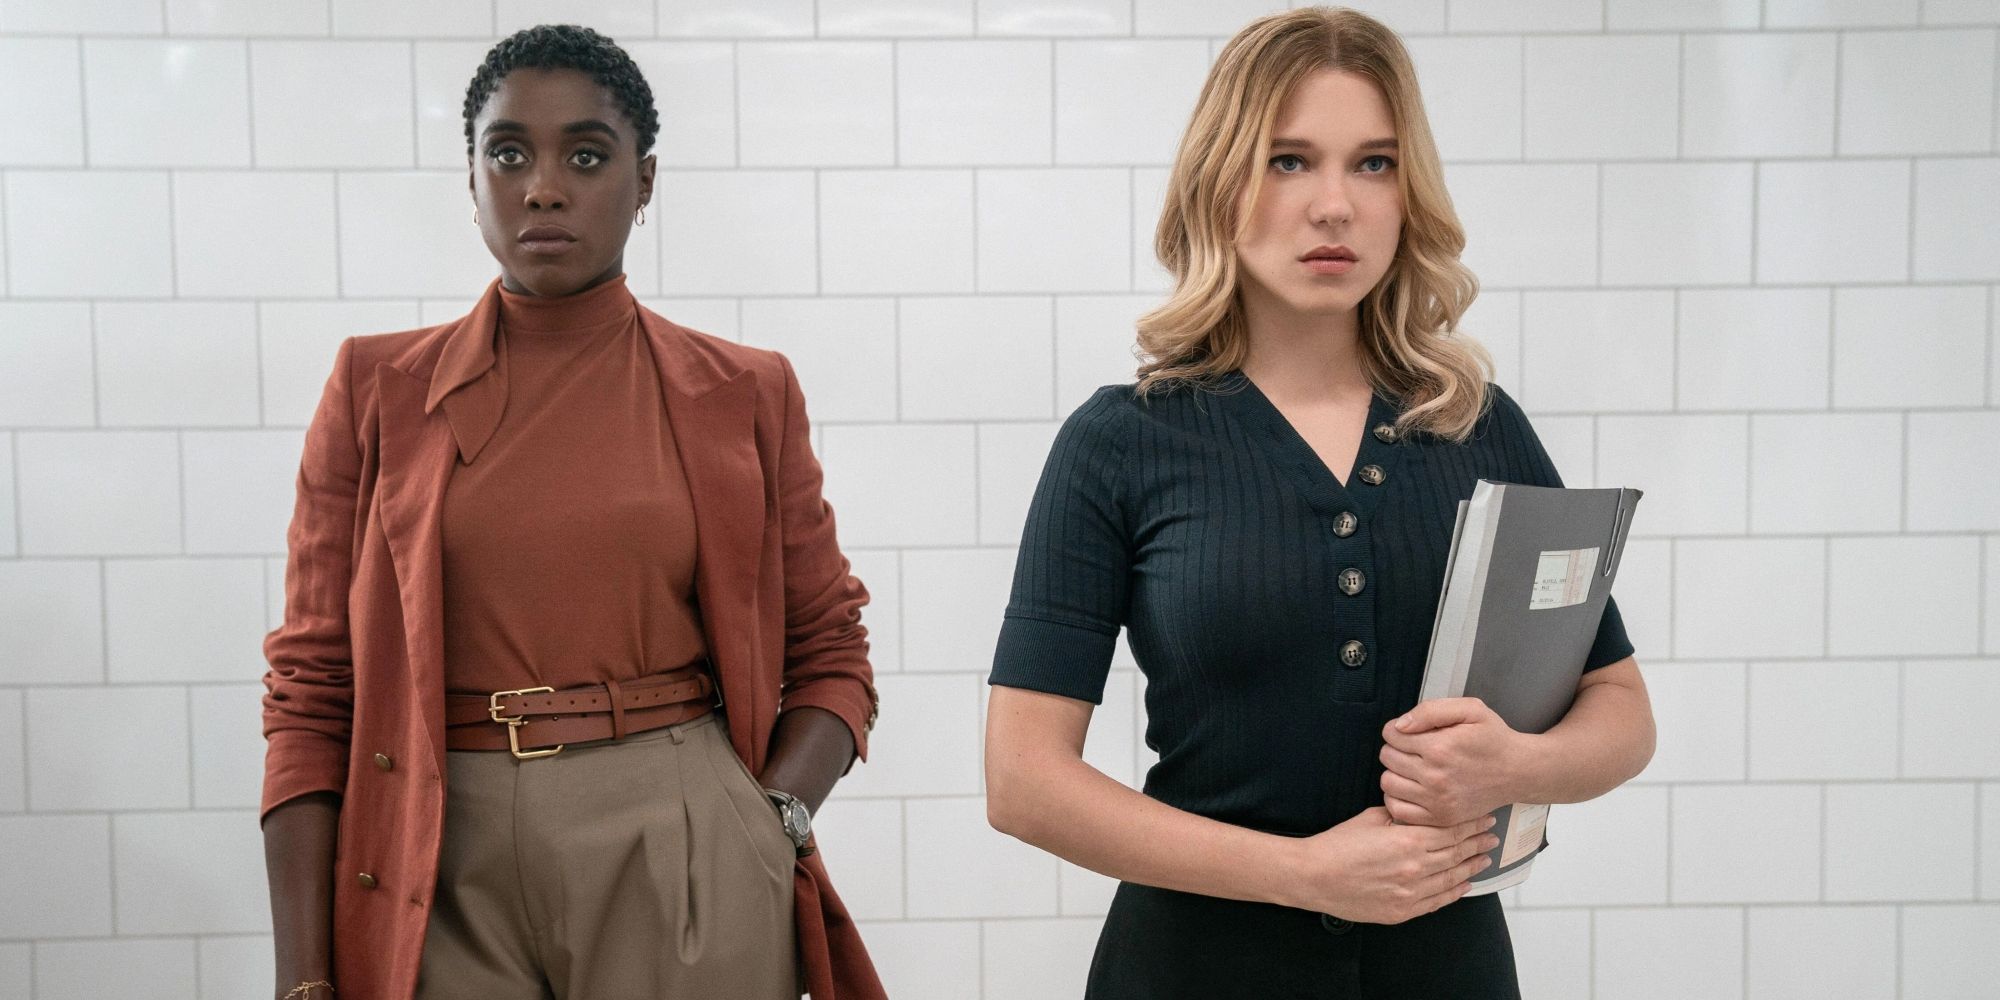 Lashana Lynch as Nomi and Lea Seydoux as Madeleine Swann in No Time To Die.